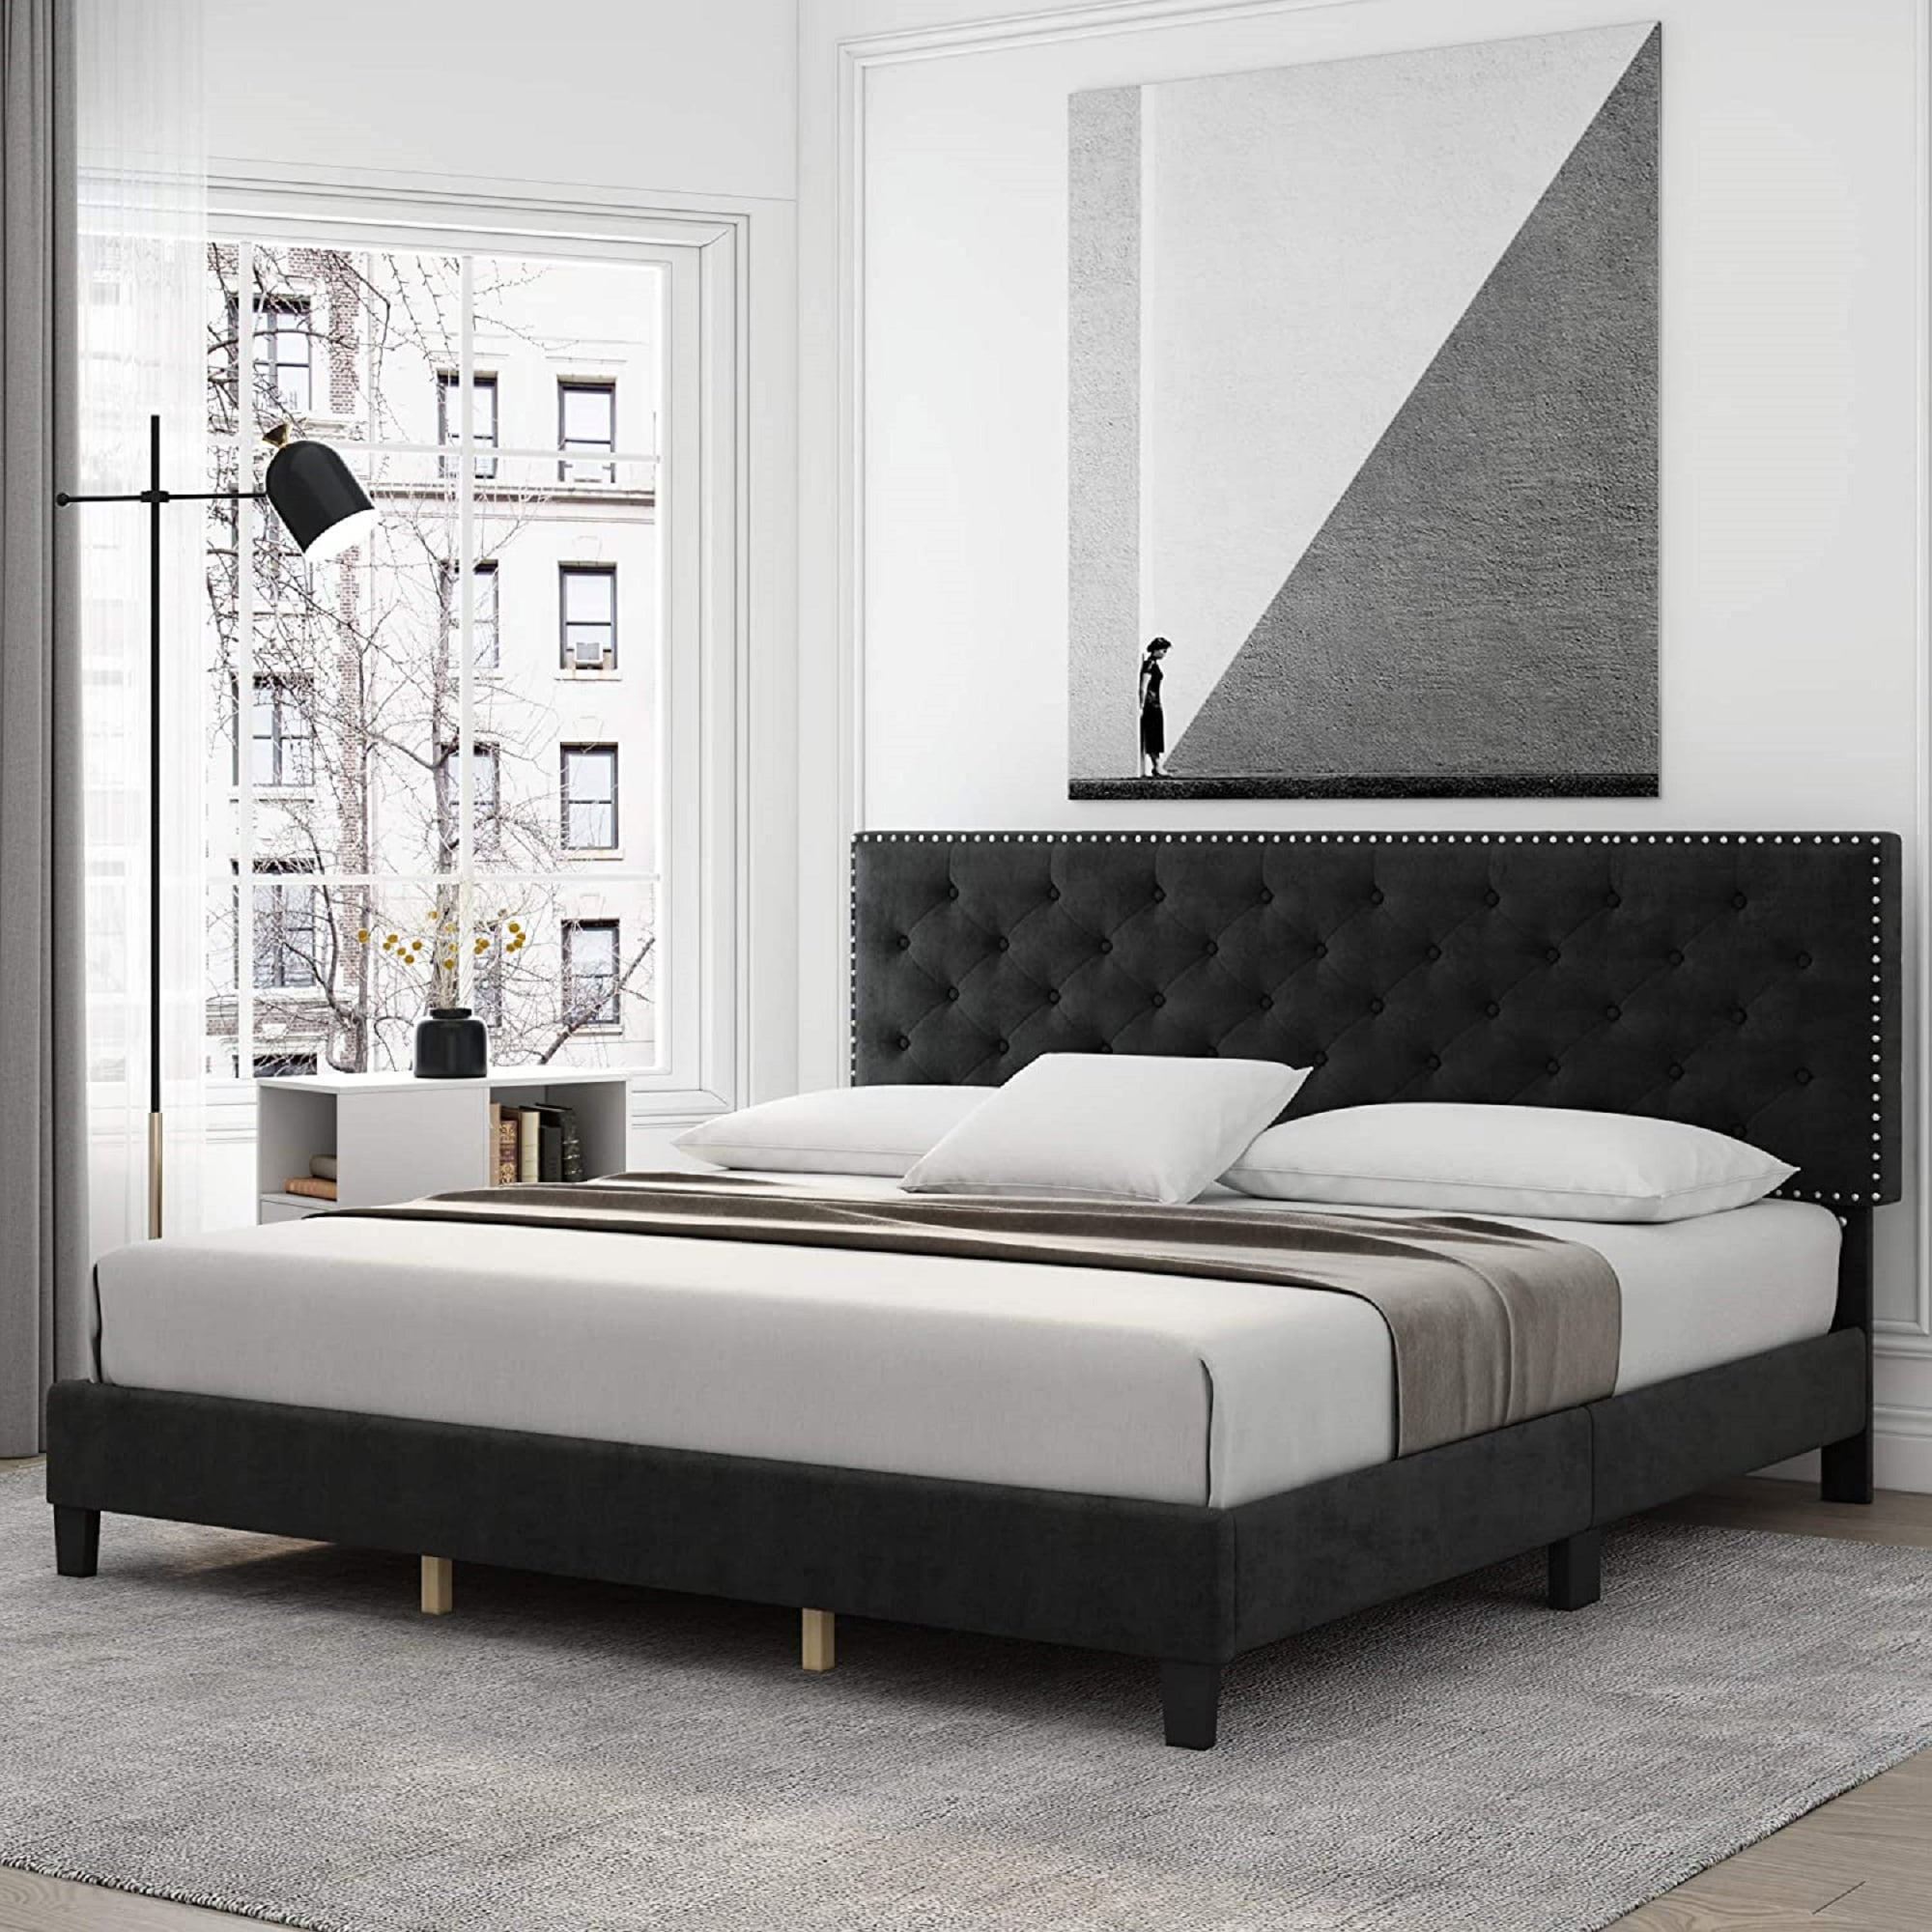 Homfa King Size Bed with Headboard, Modern Upholstered Platform Bed